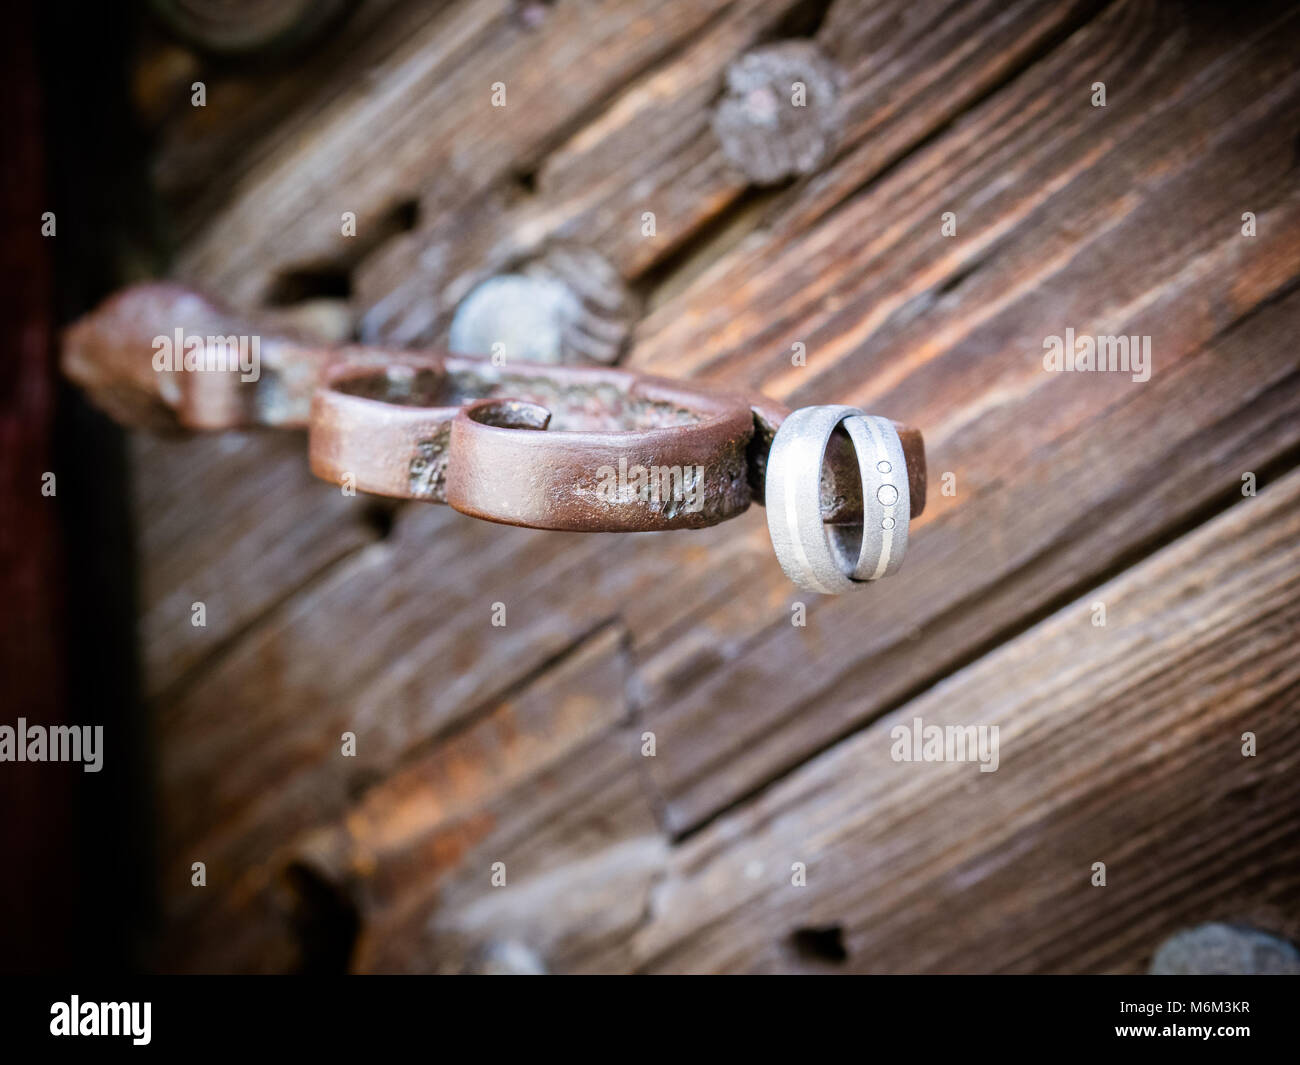 the wedding rings at the old church door Stock Photo